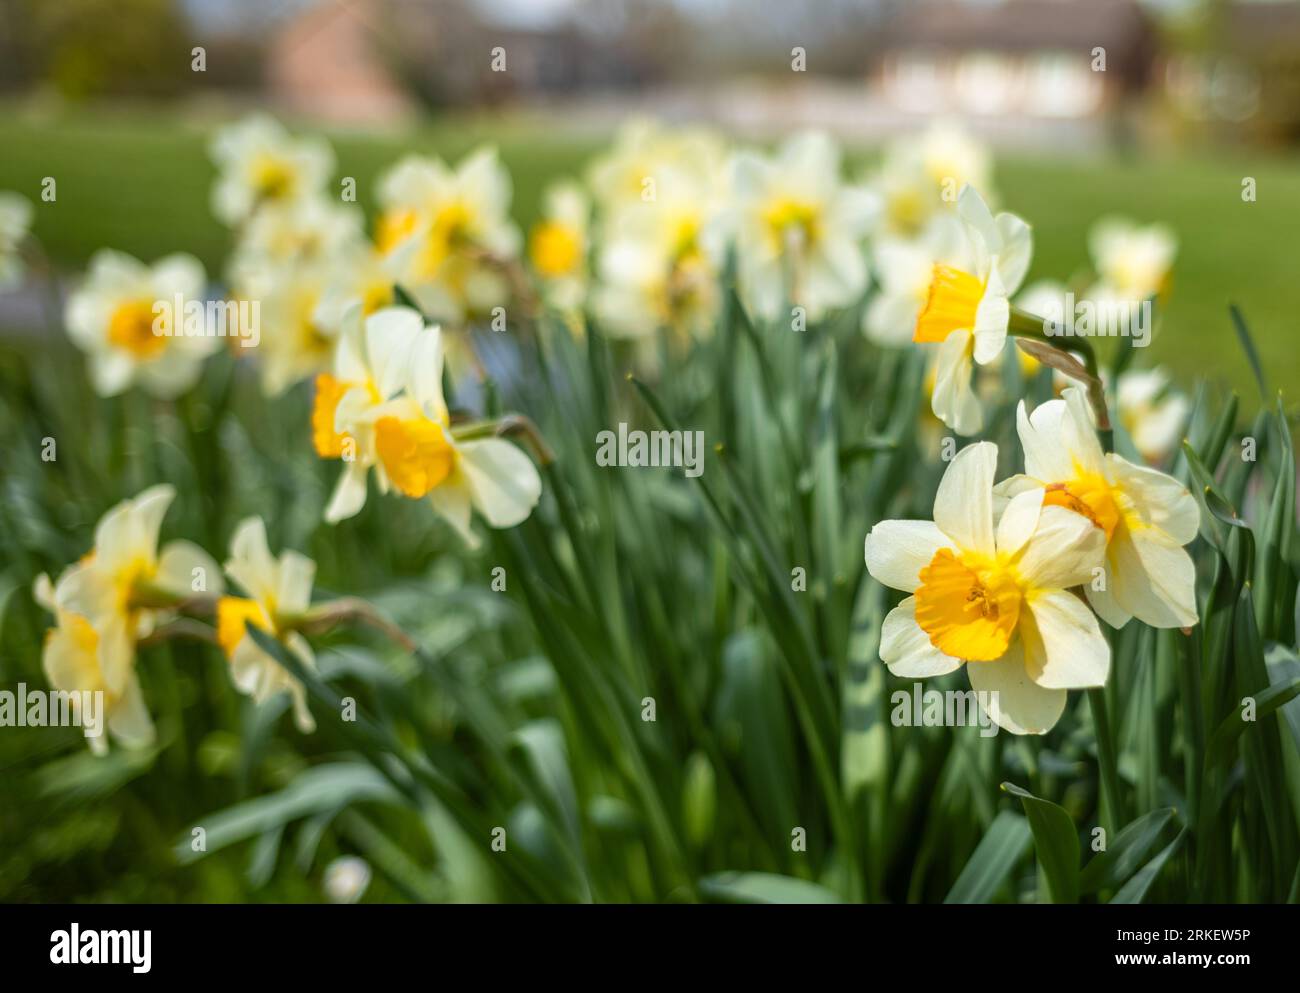 Yellow and white daffodils (Narcissus) growing in a public park in southern England Stock Photo